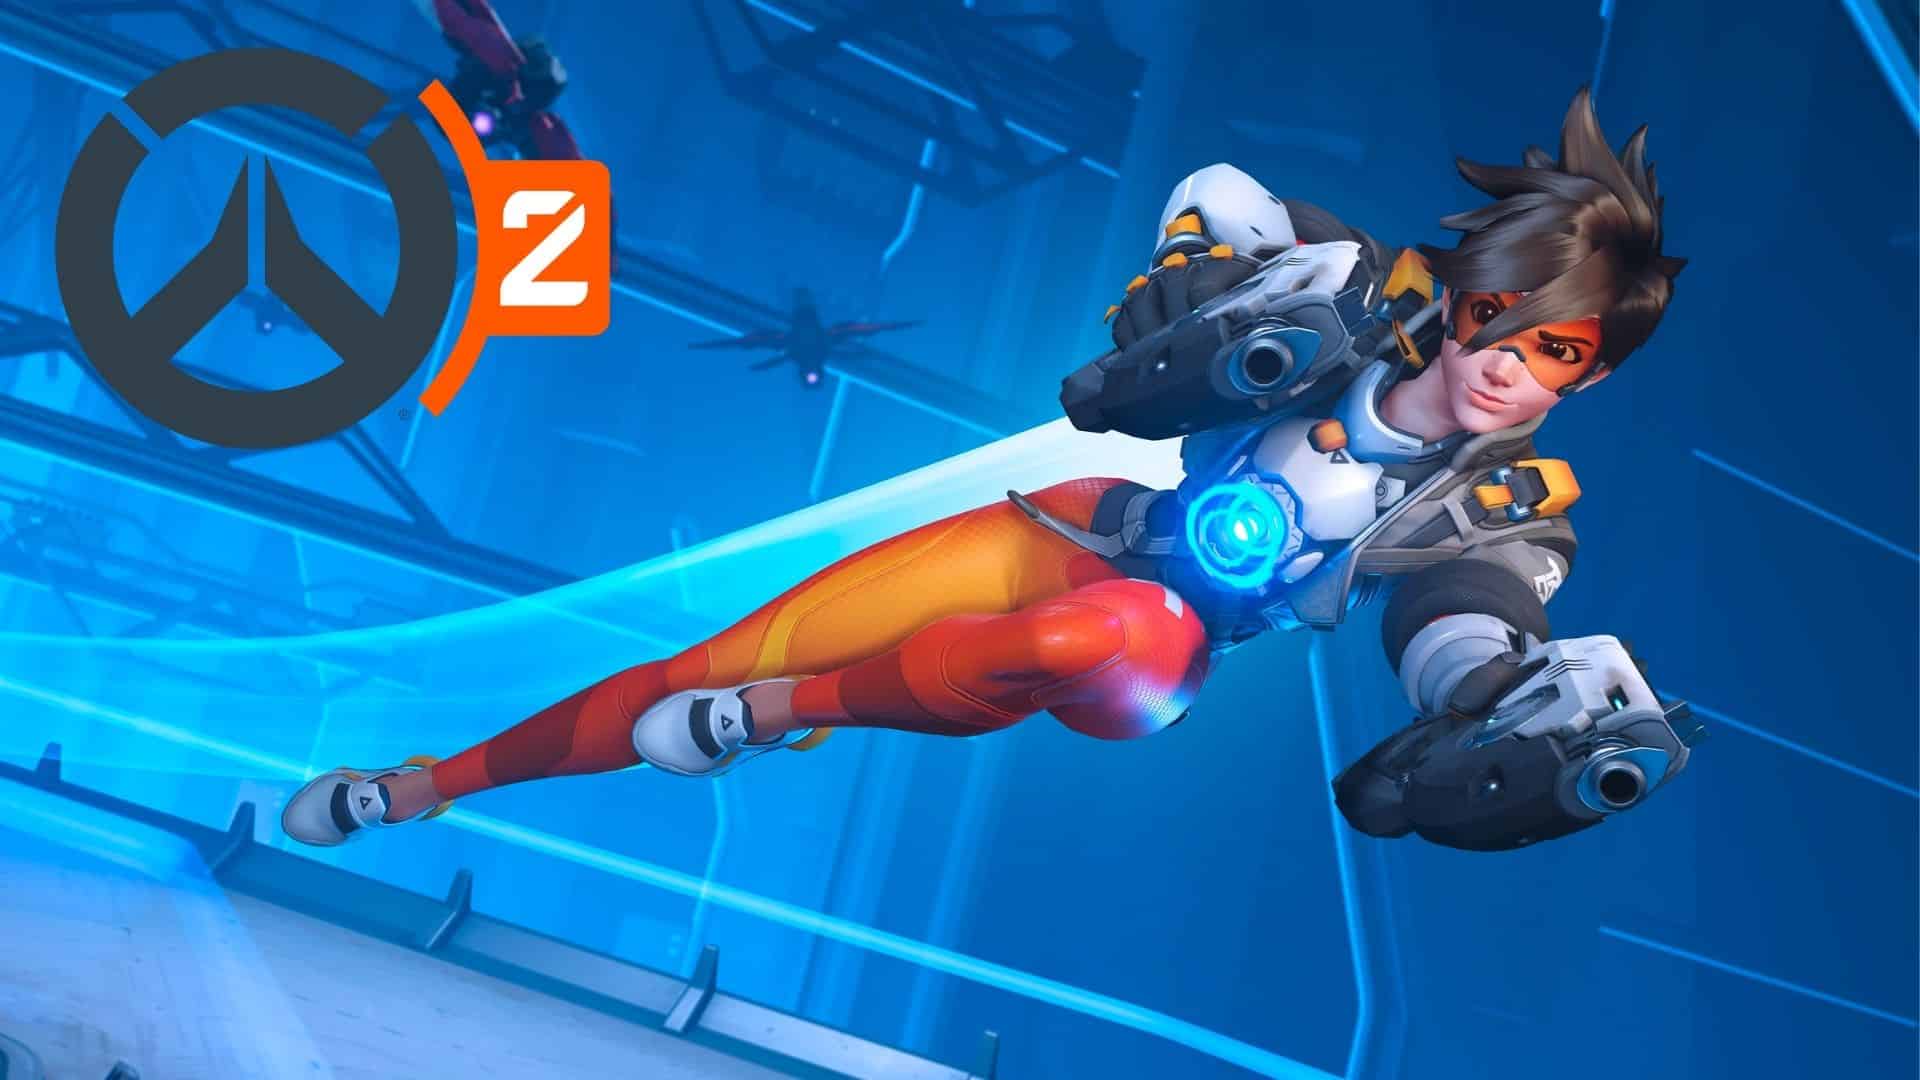 Overwatch Tracer with Overwatch 2 logo